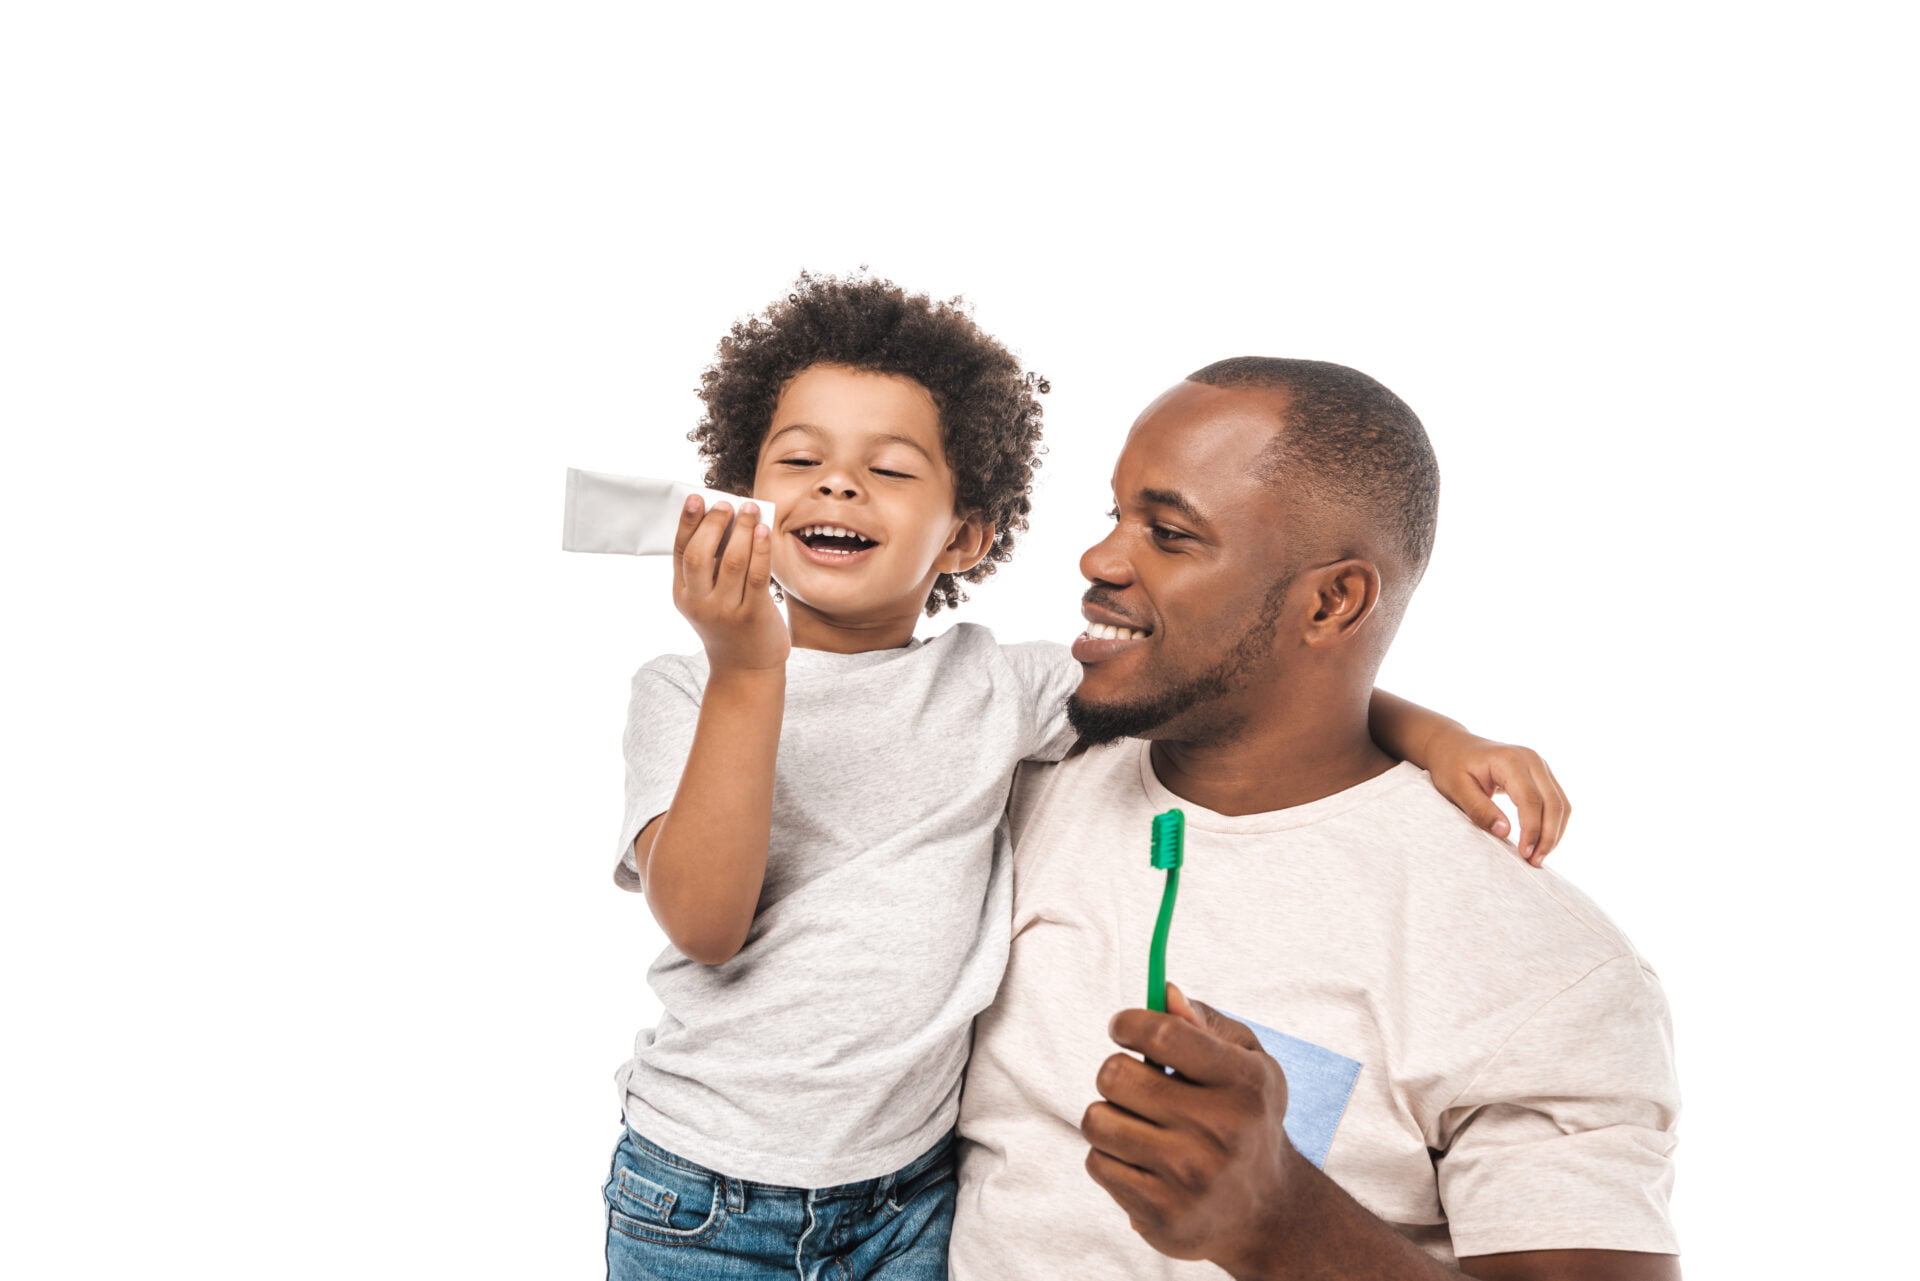 Young black child with father brushing teeth